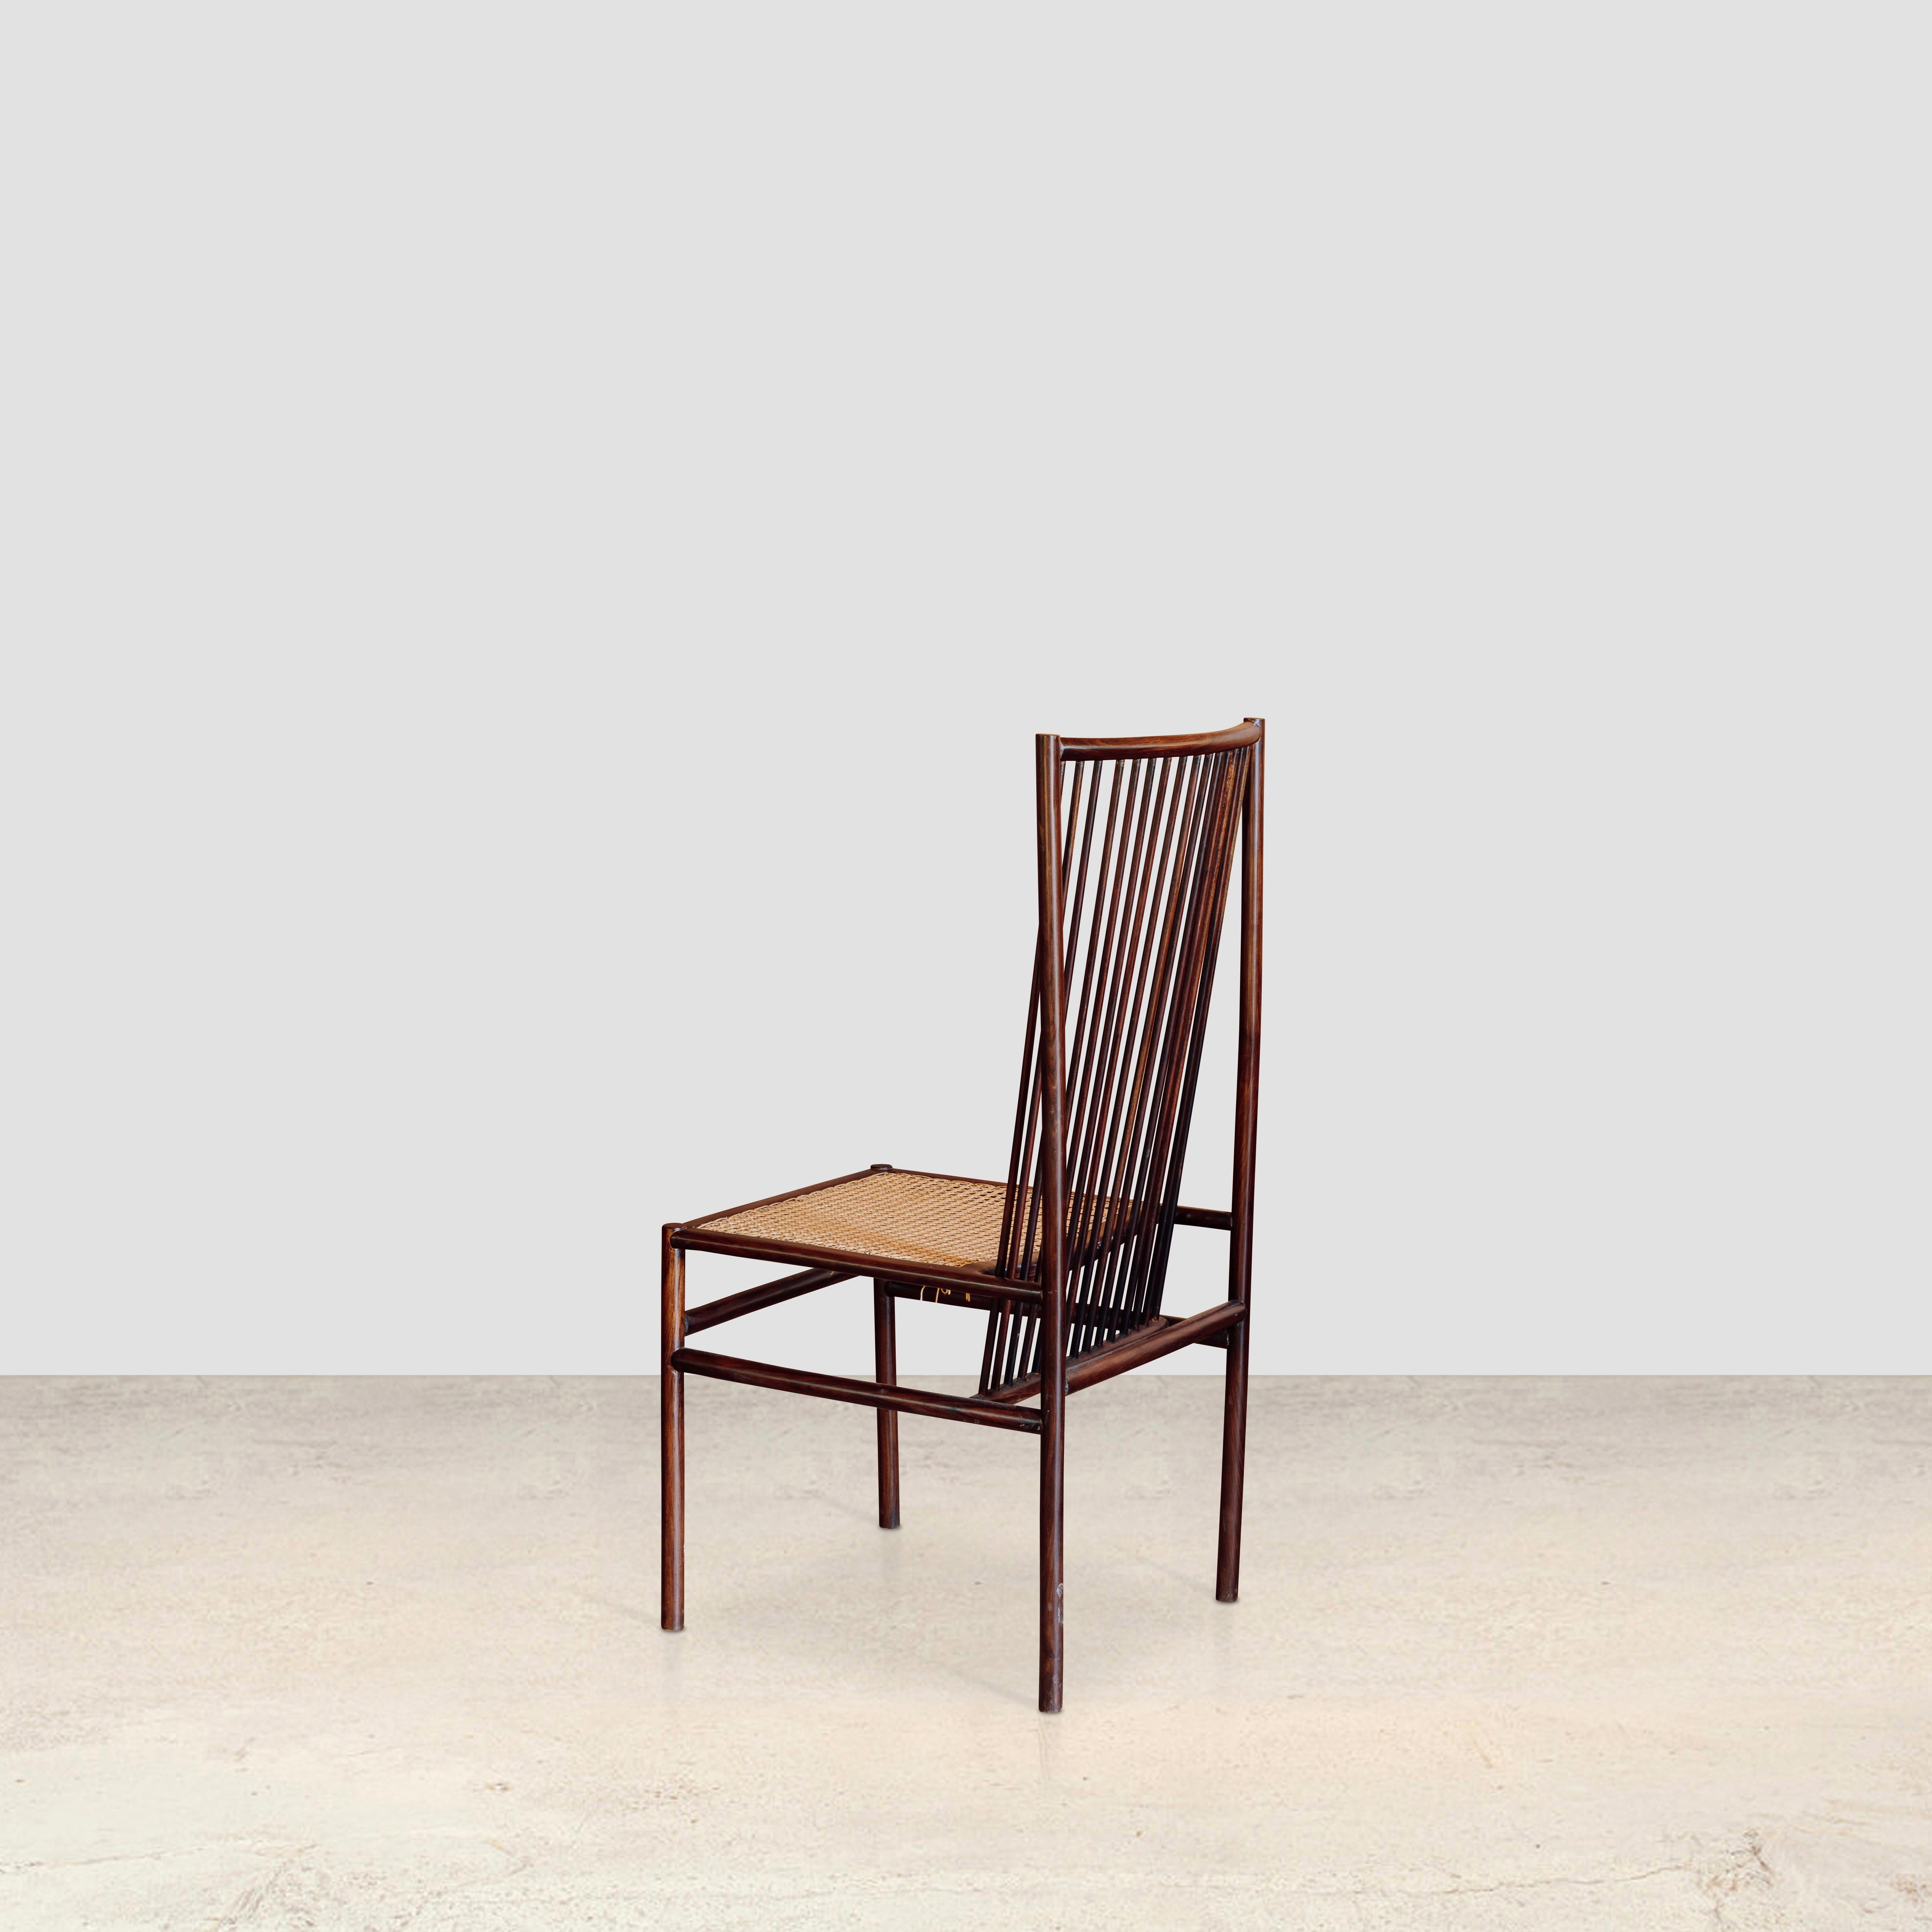 High structural cane chair 
by Joaquim Tenreiro

To compose light seats, Tenreiro used thin wooden sticks in some of his chairs. One of these pieces, which became well known, was the structural chair. Created in 1947 in two versions, one with a